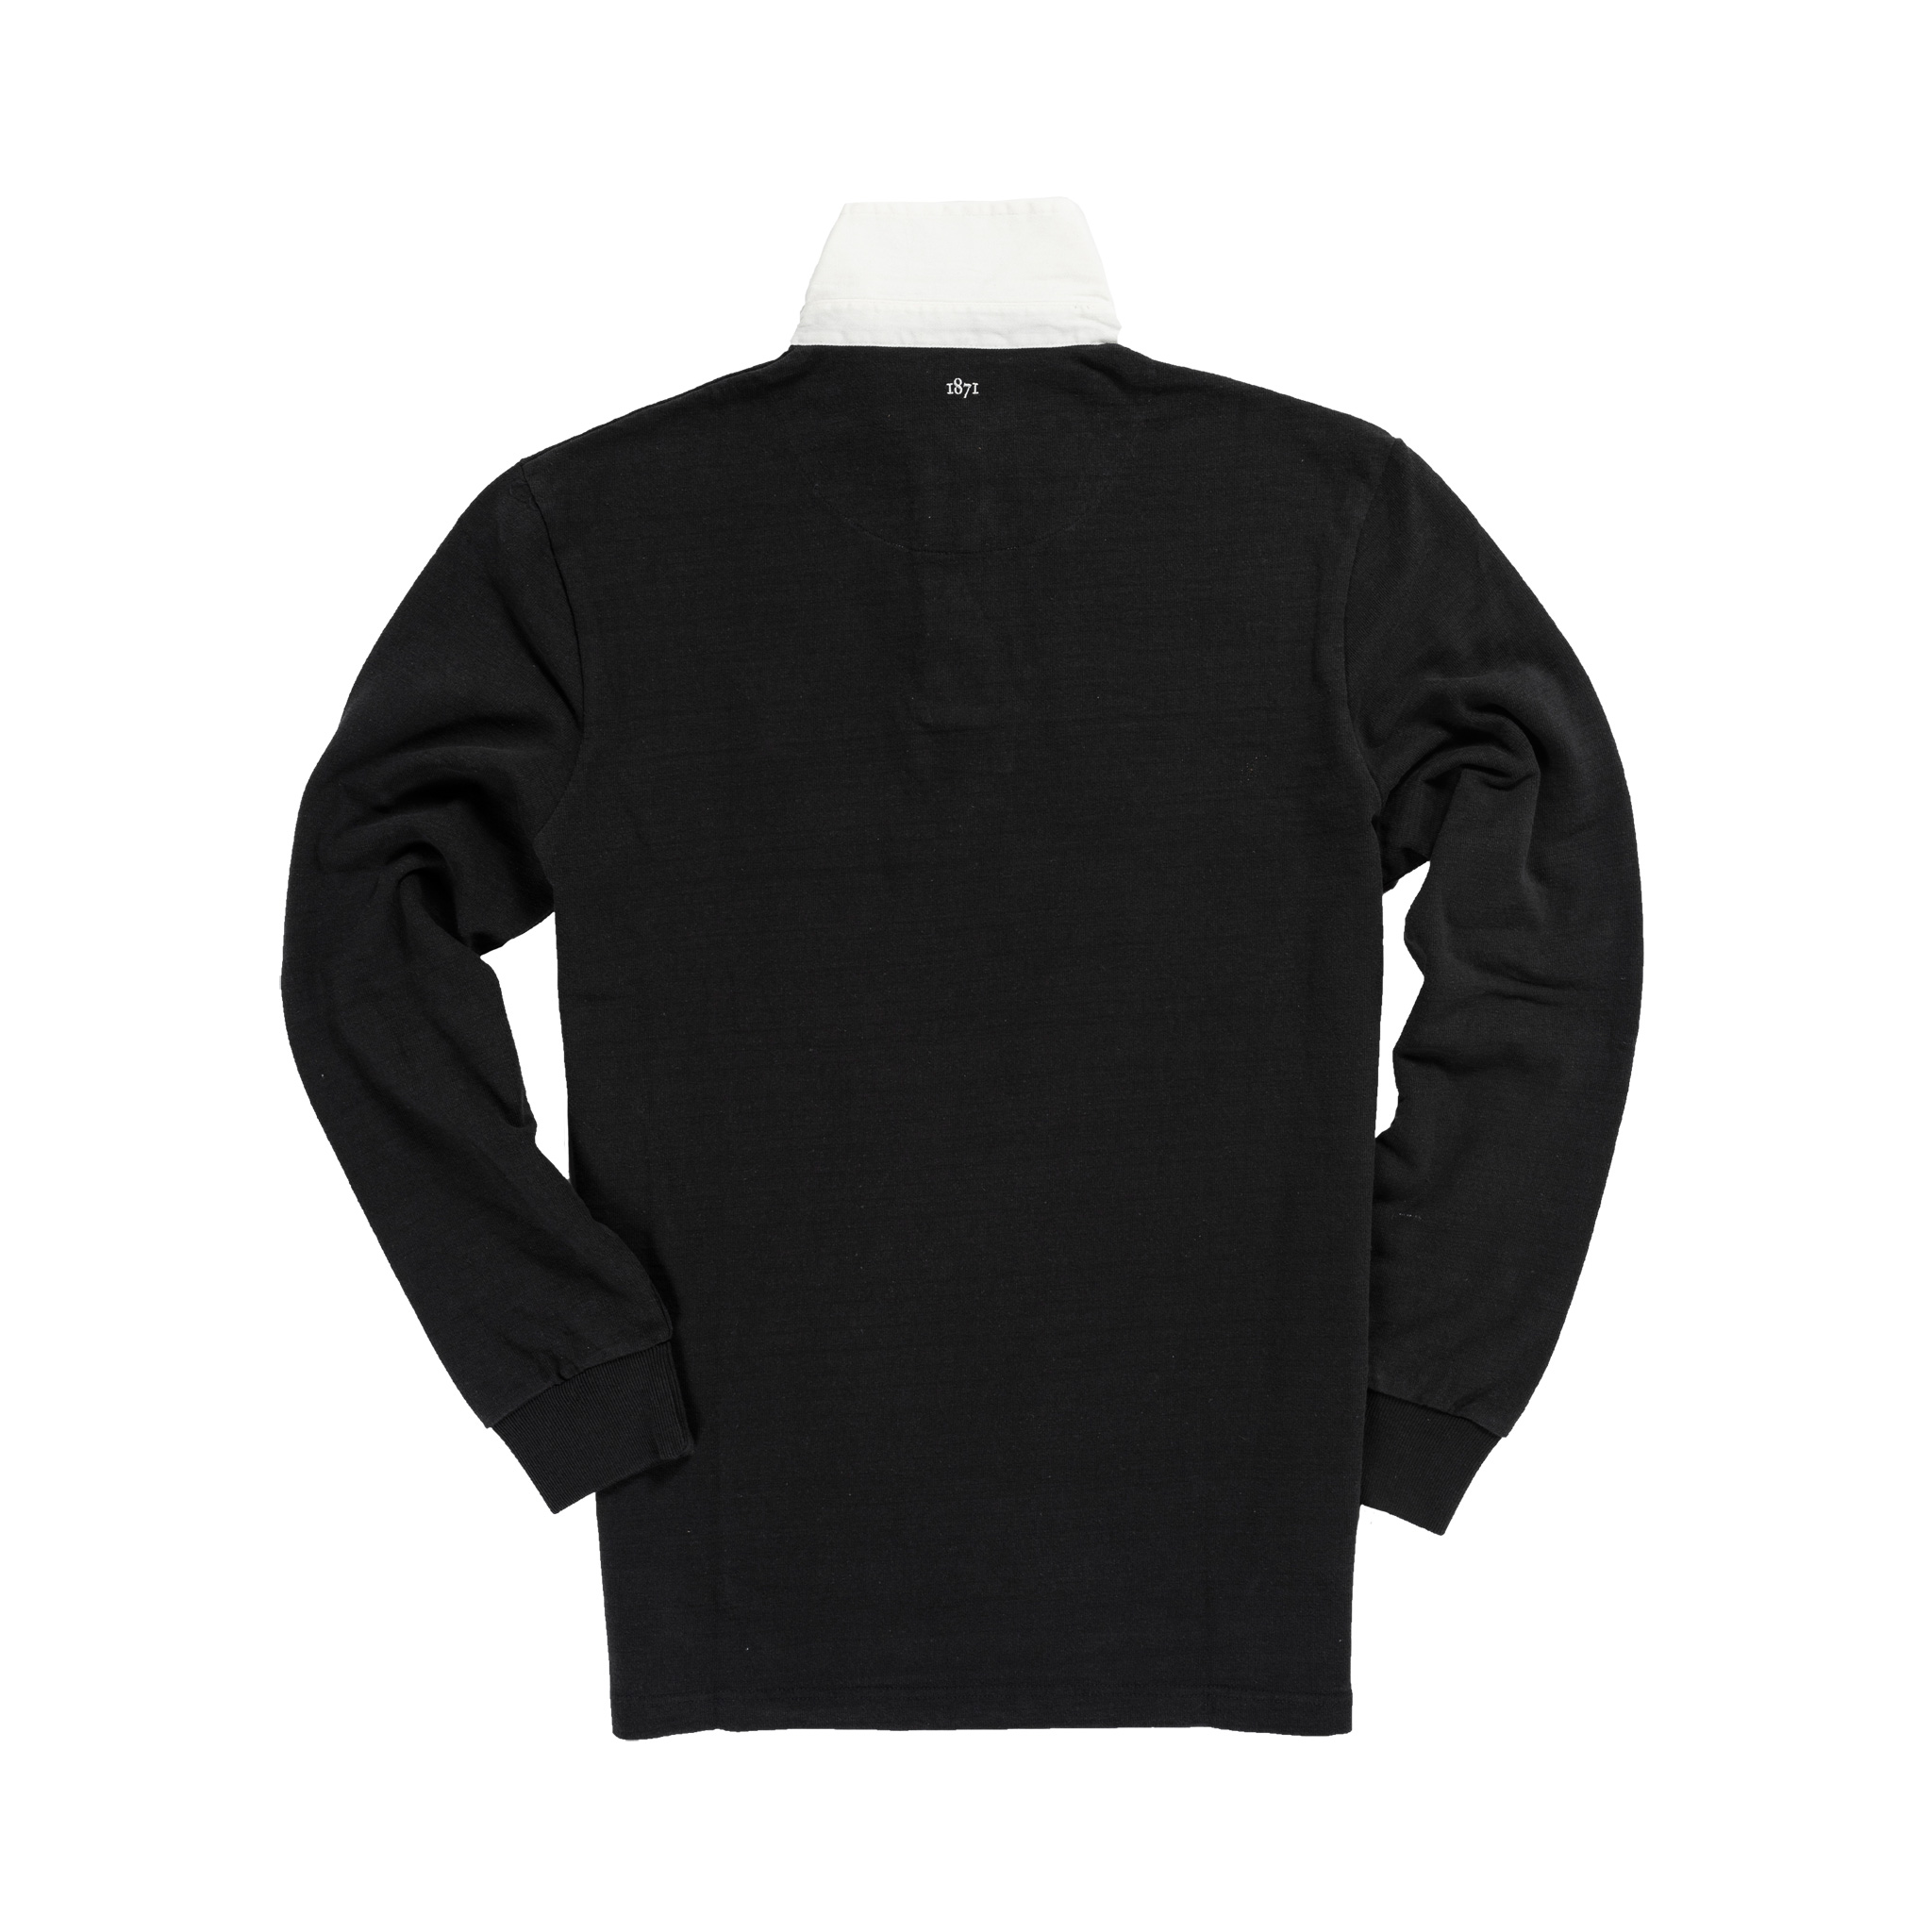 Classic Black 1871 Vintage Rugby Shirt